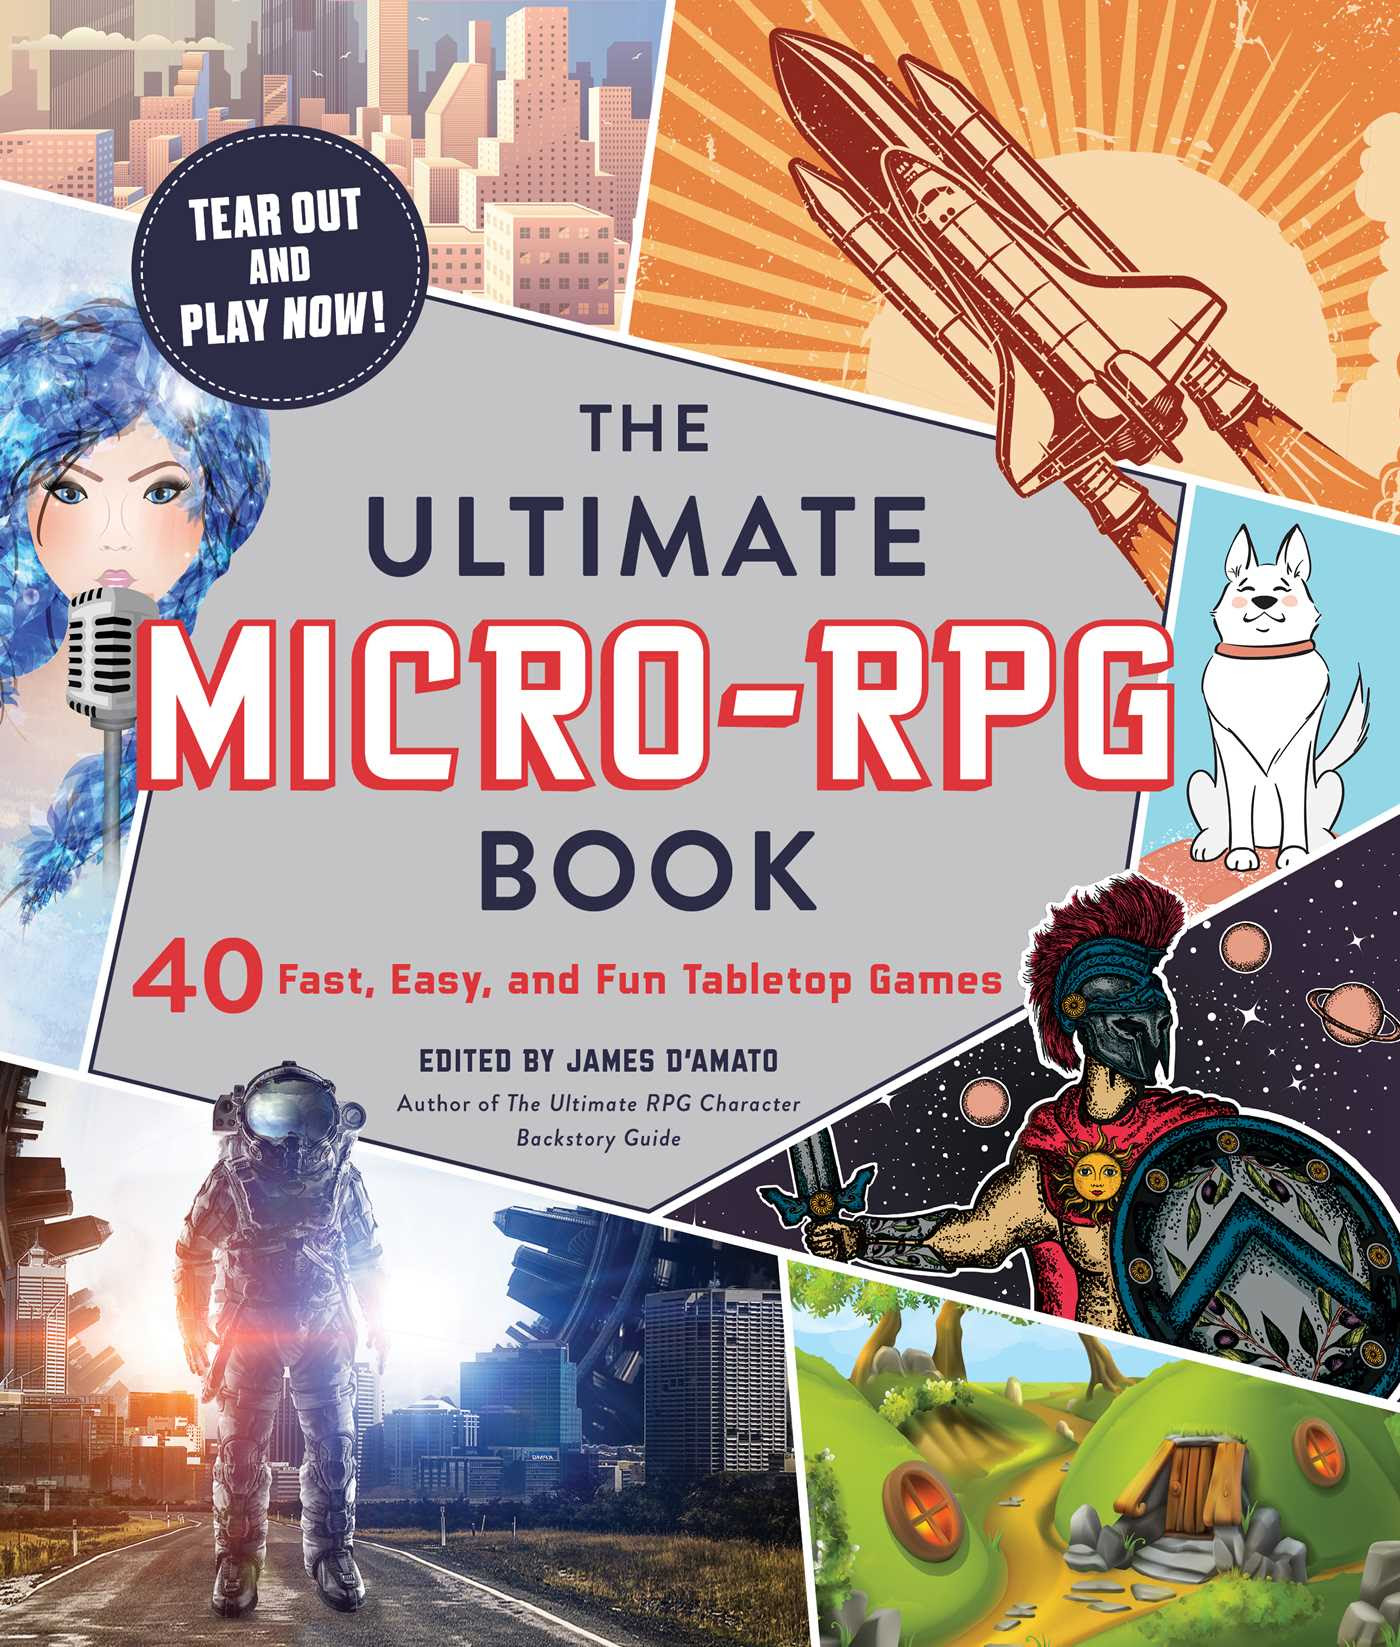 The Ultimate Micro-RPG Book: 40 Fast, Easy, and Fun Tabletop Games EPUB